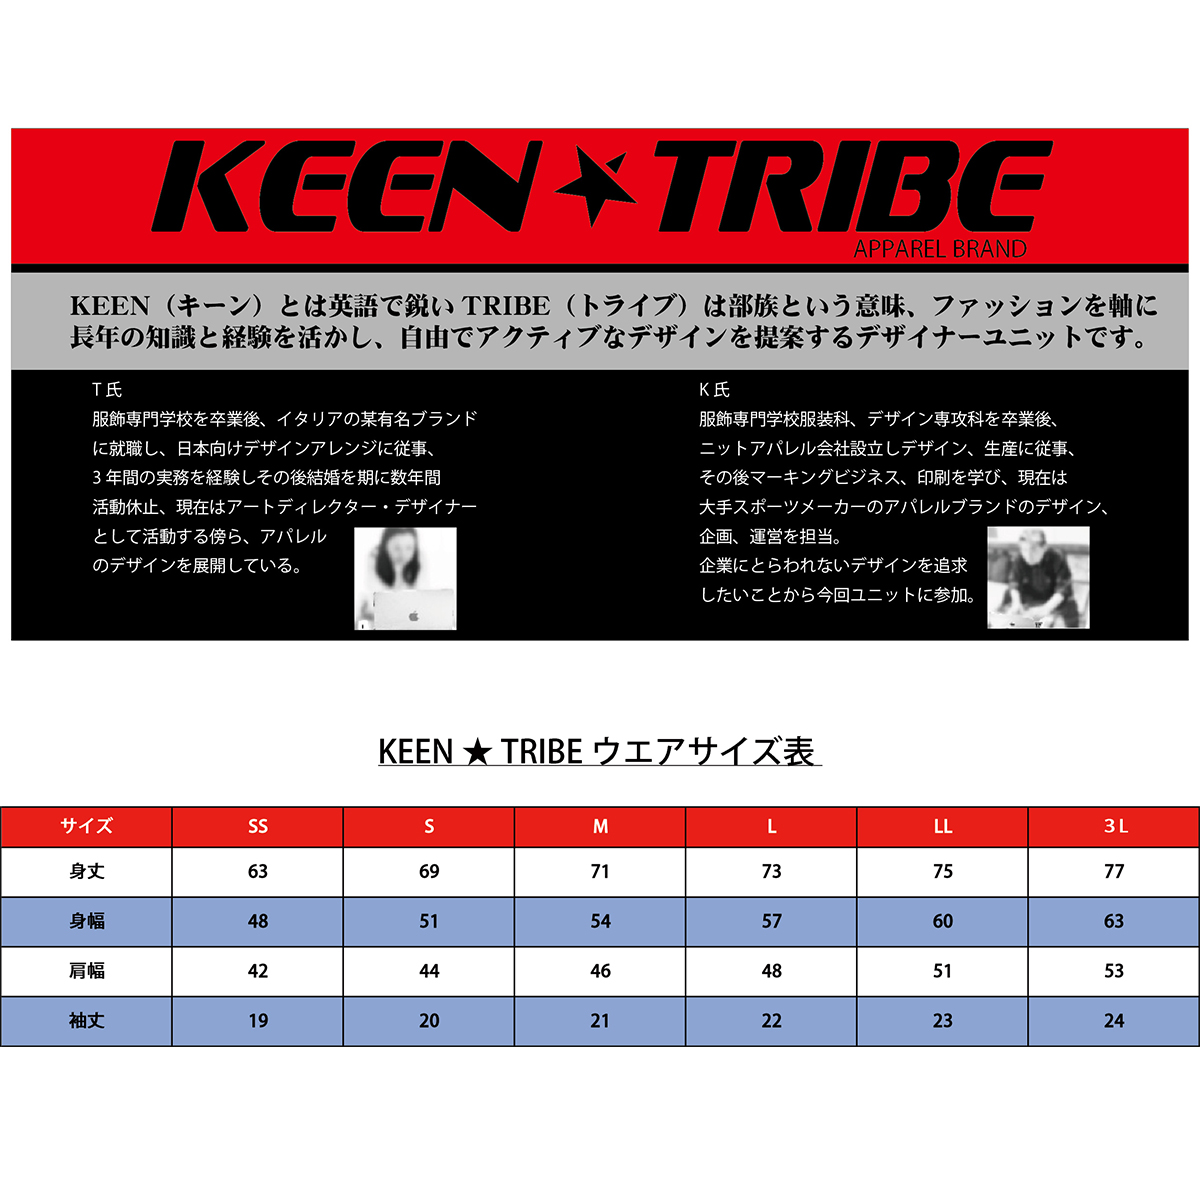 KEEN ★ TRIBE　KT-54(受注生産)